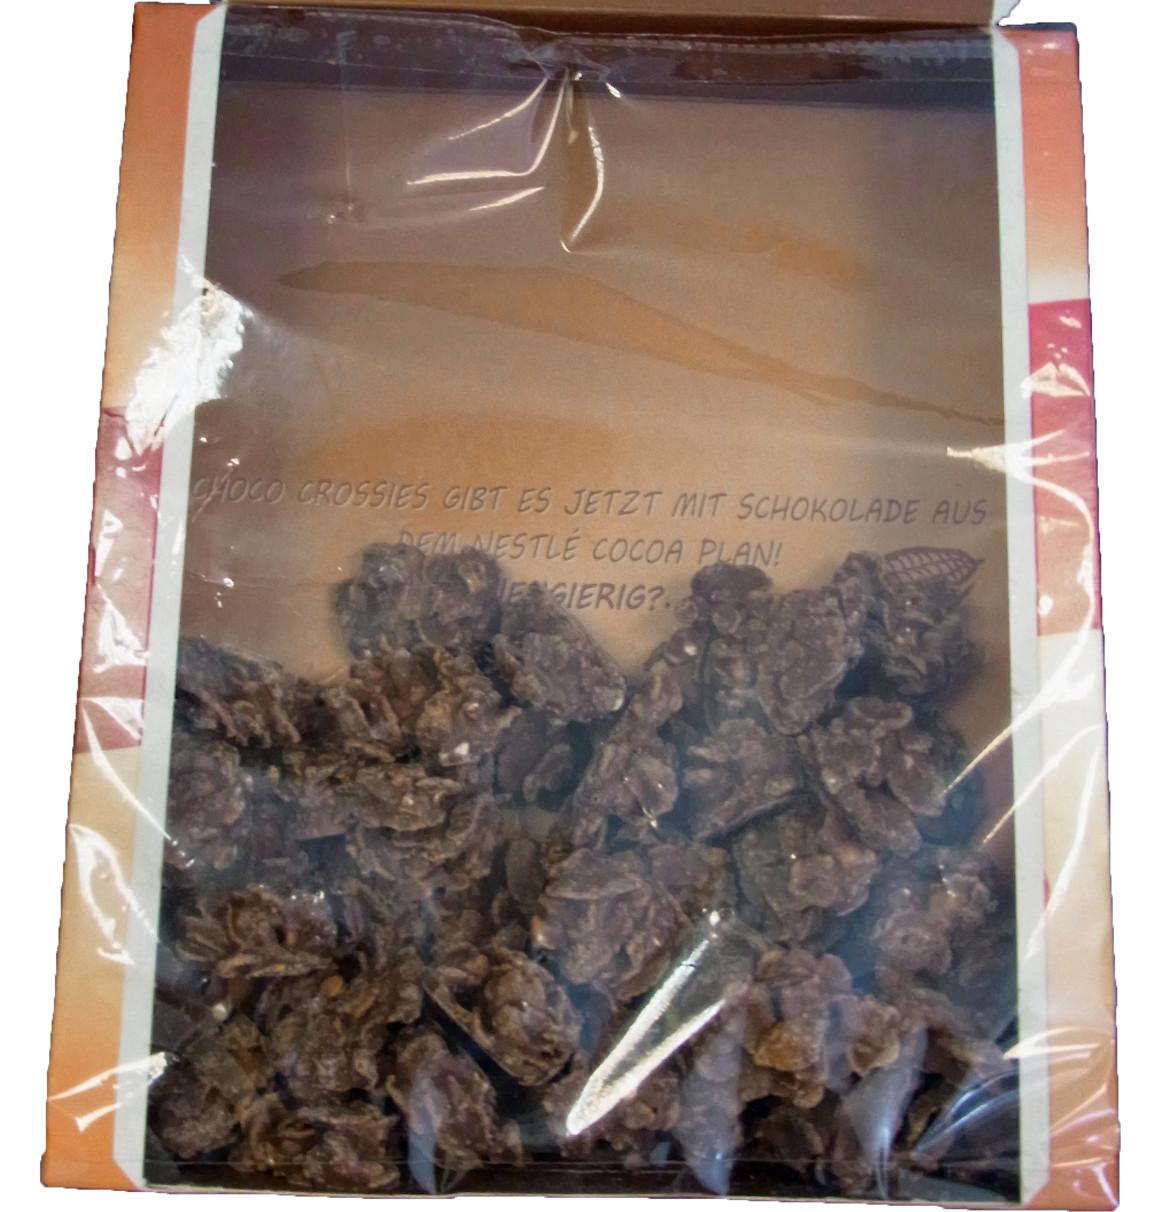 Offene Choco crossies Packung